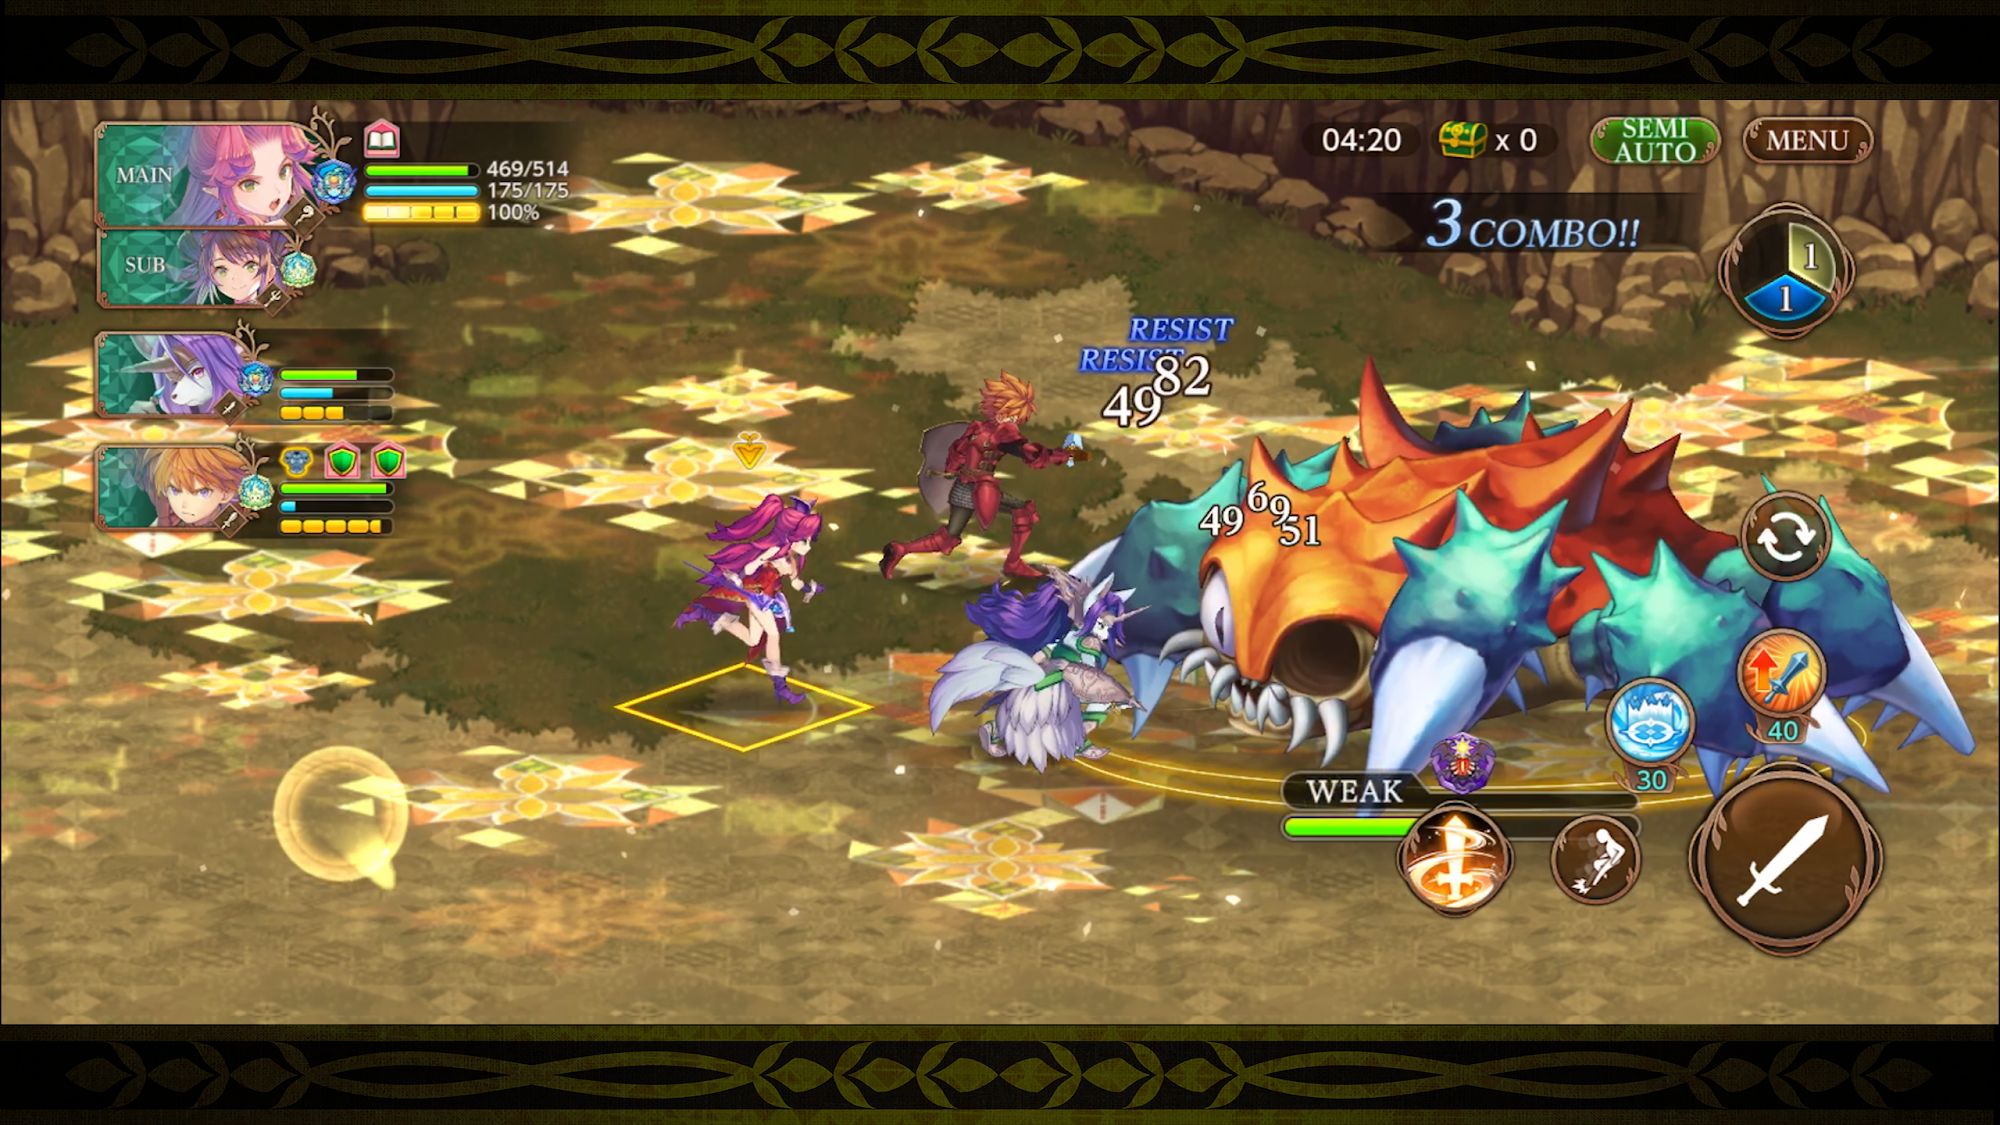 ECHOES of MANA - Android game screenshots.